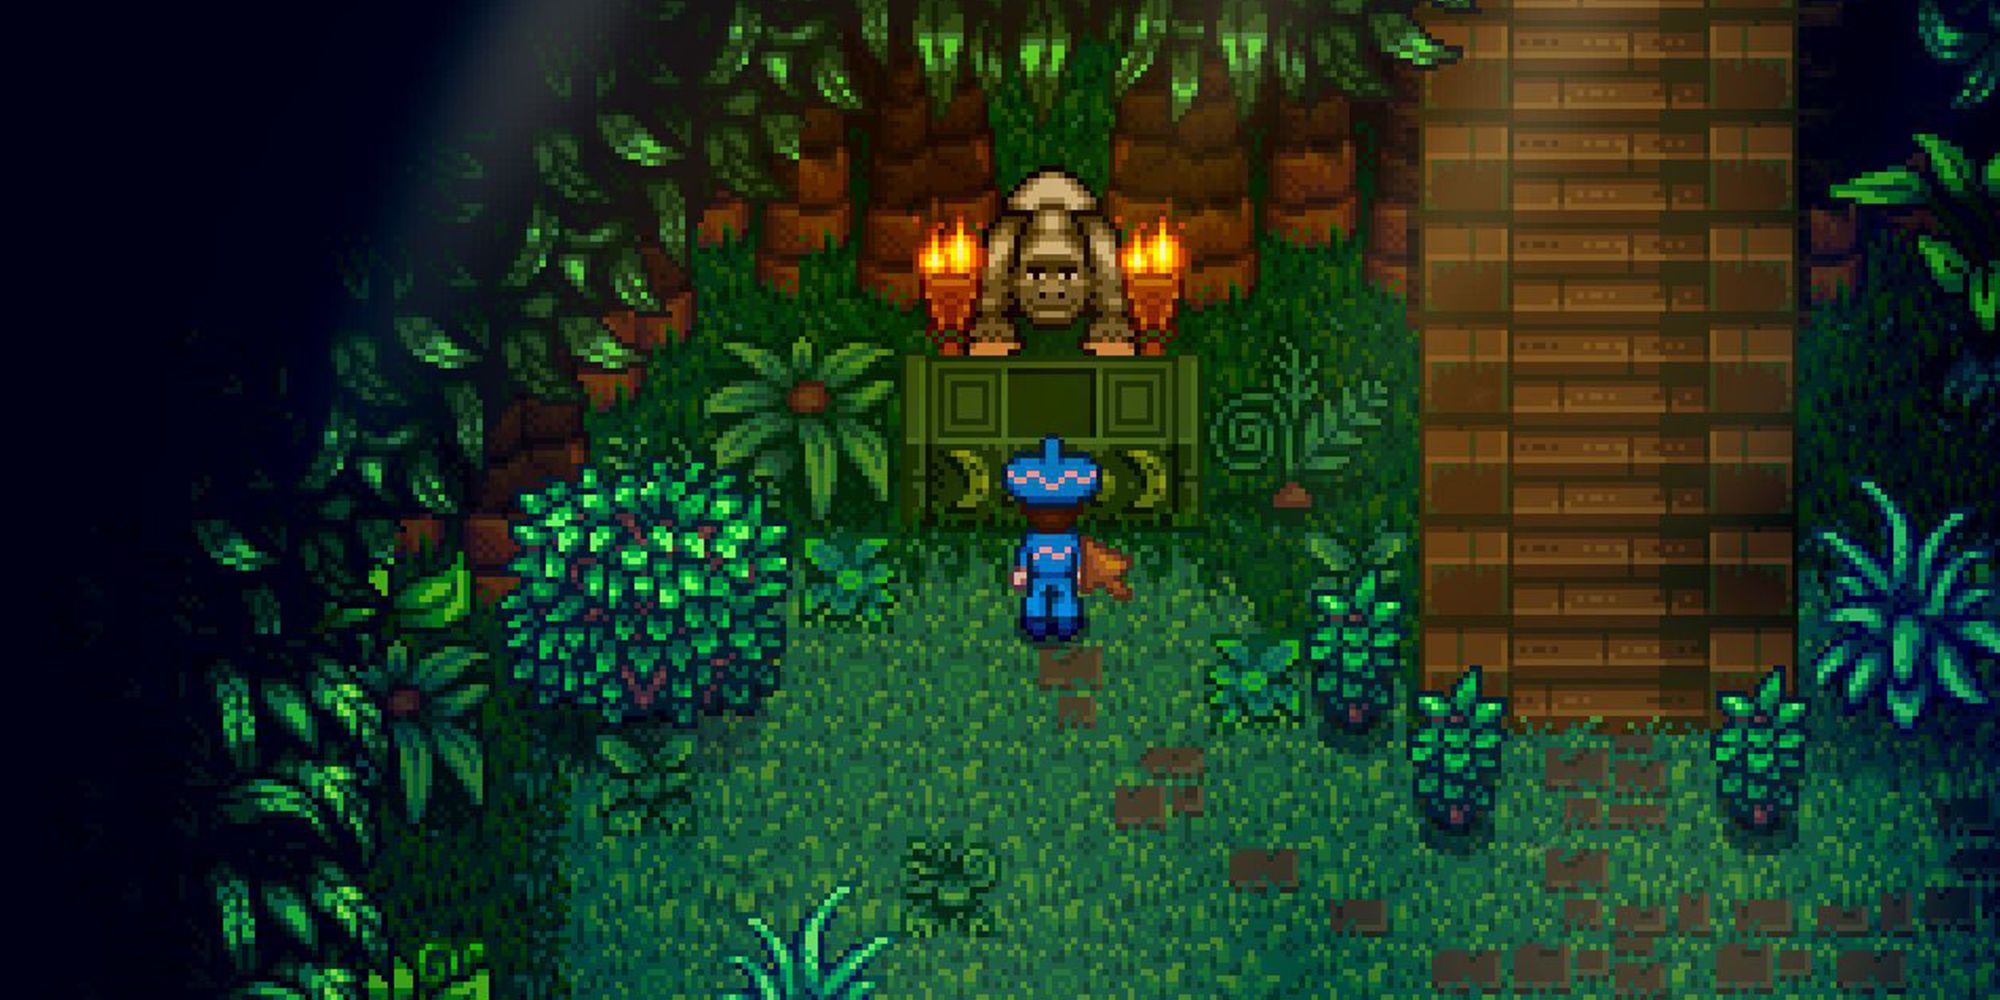 A player character lighting the two torches surrounding the Banana Shrine in Stardew Valley